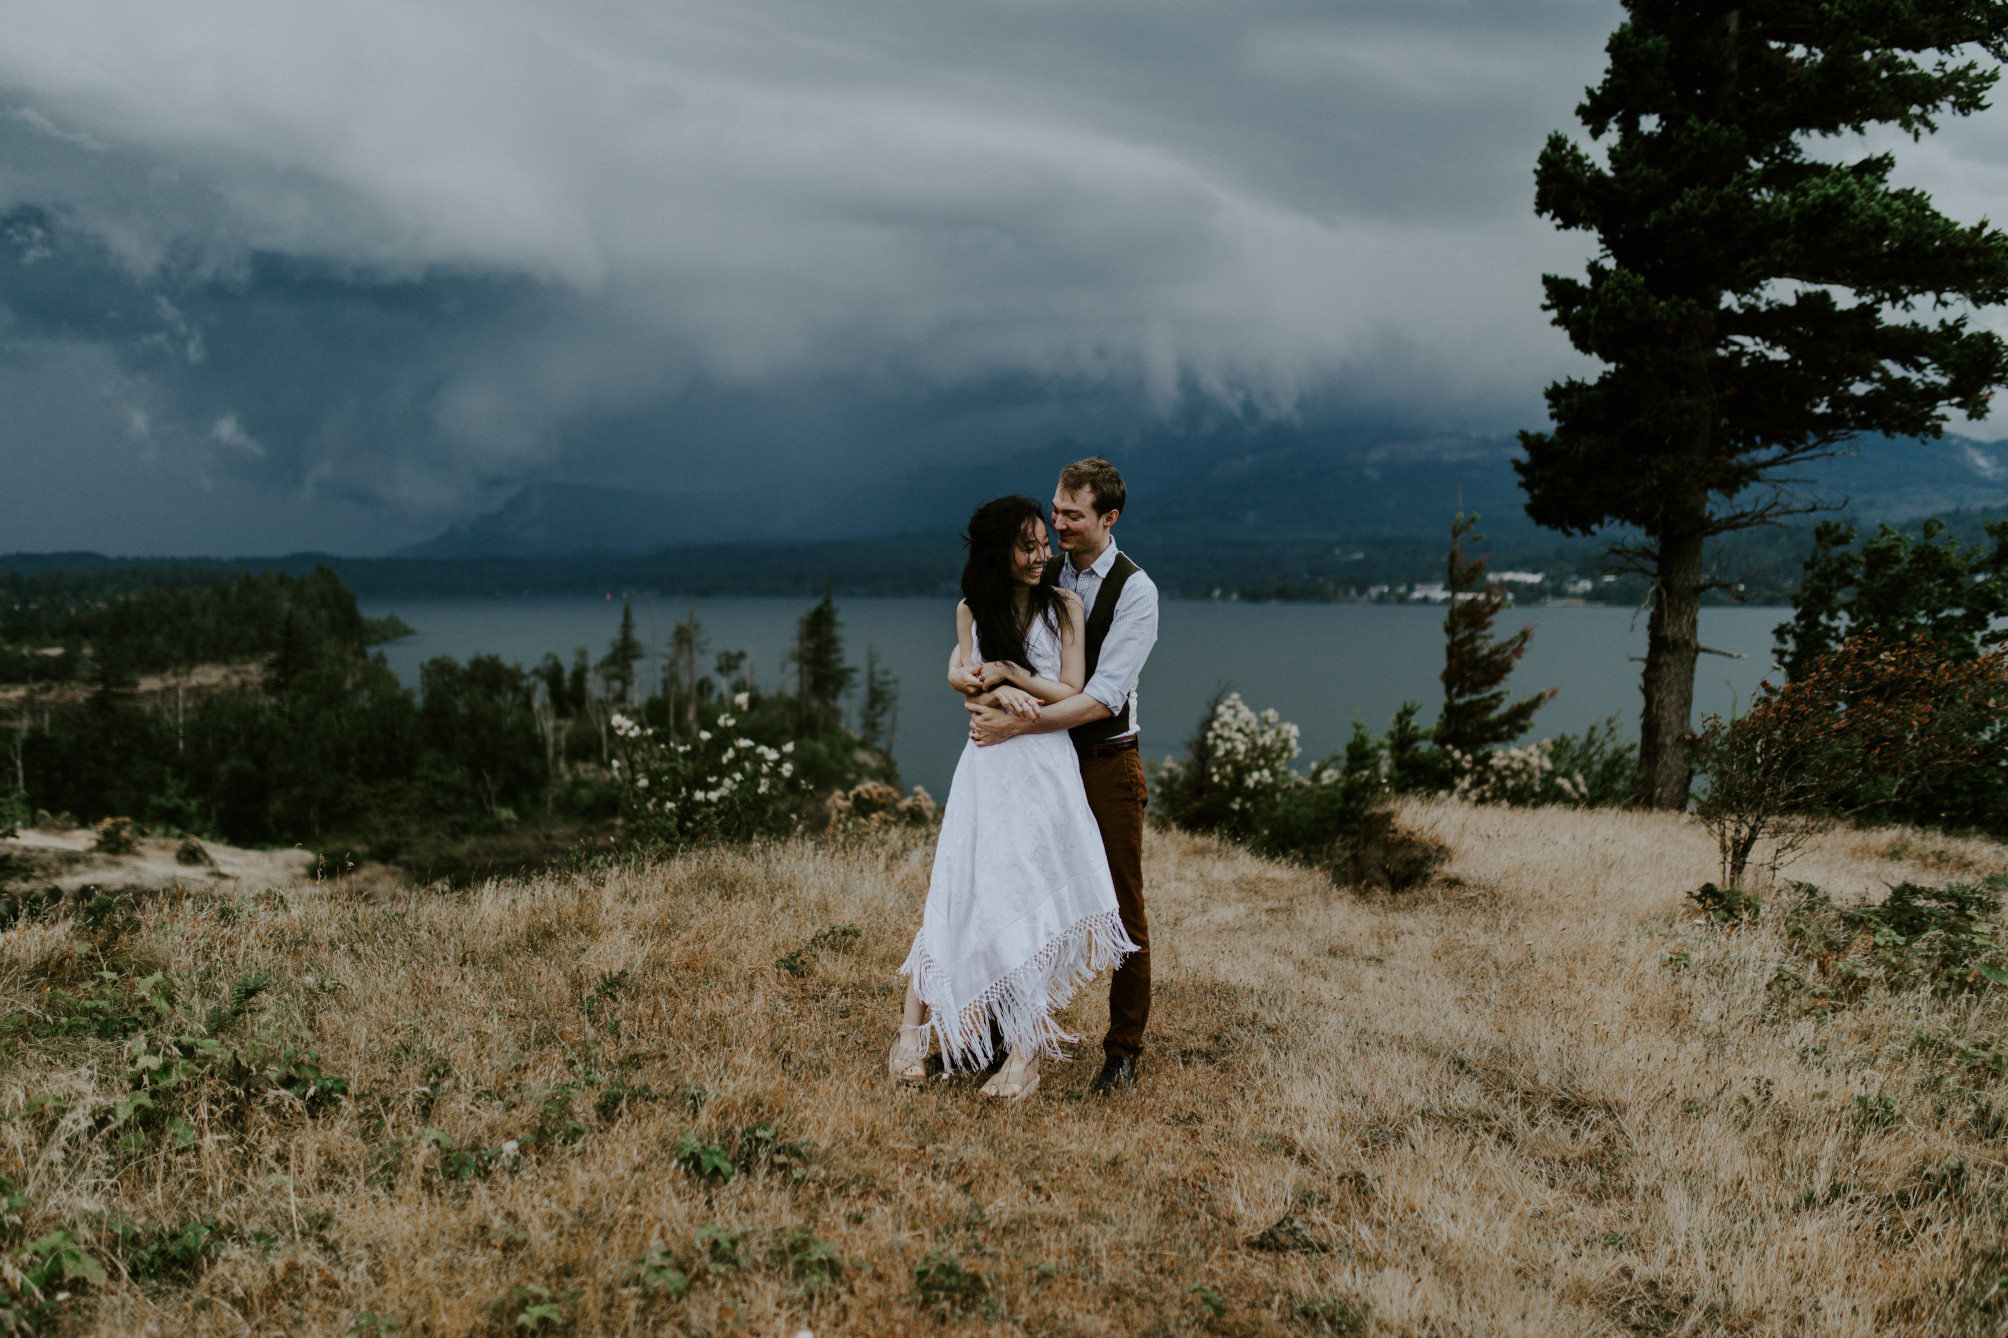 Kimberlie and Jacob stand in front of an incoming storm at the Columbia River Gorge. Elopement wedding photography at Cascade Locks by Sienna Plus Josh.